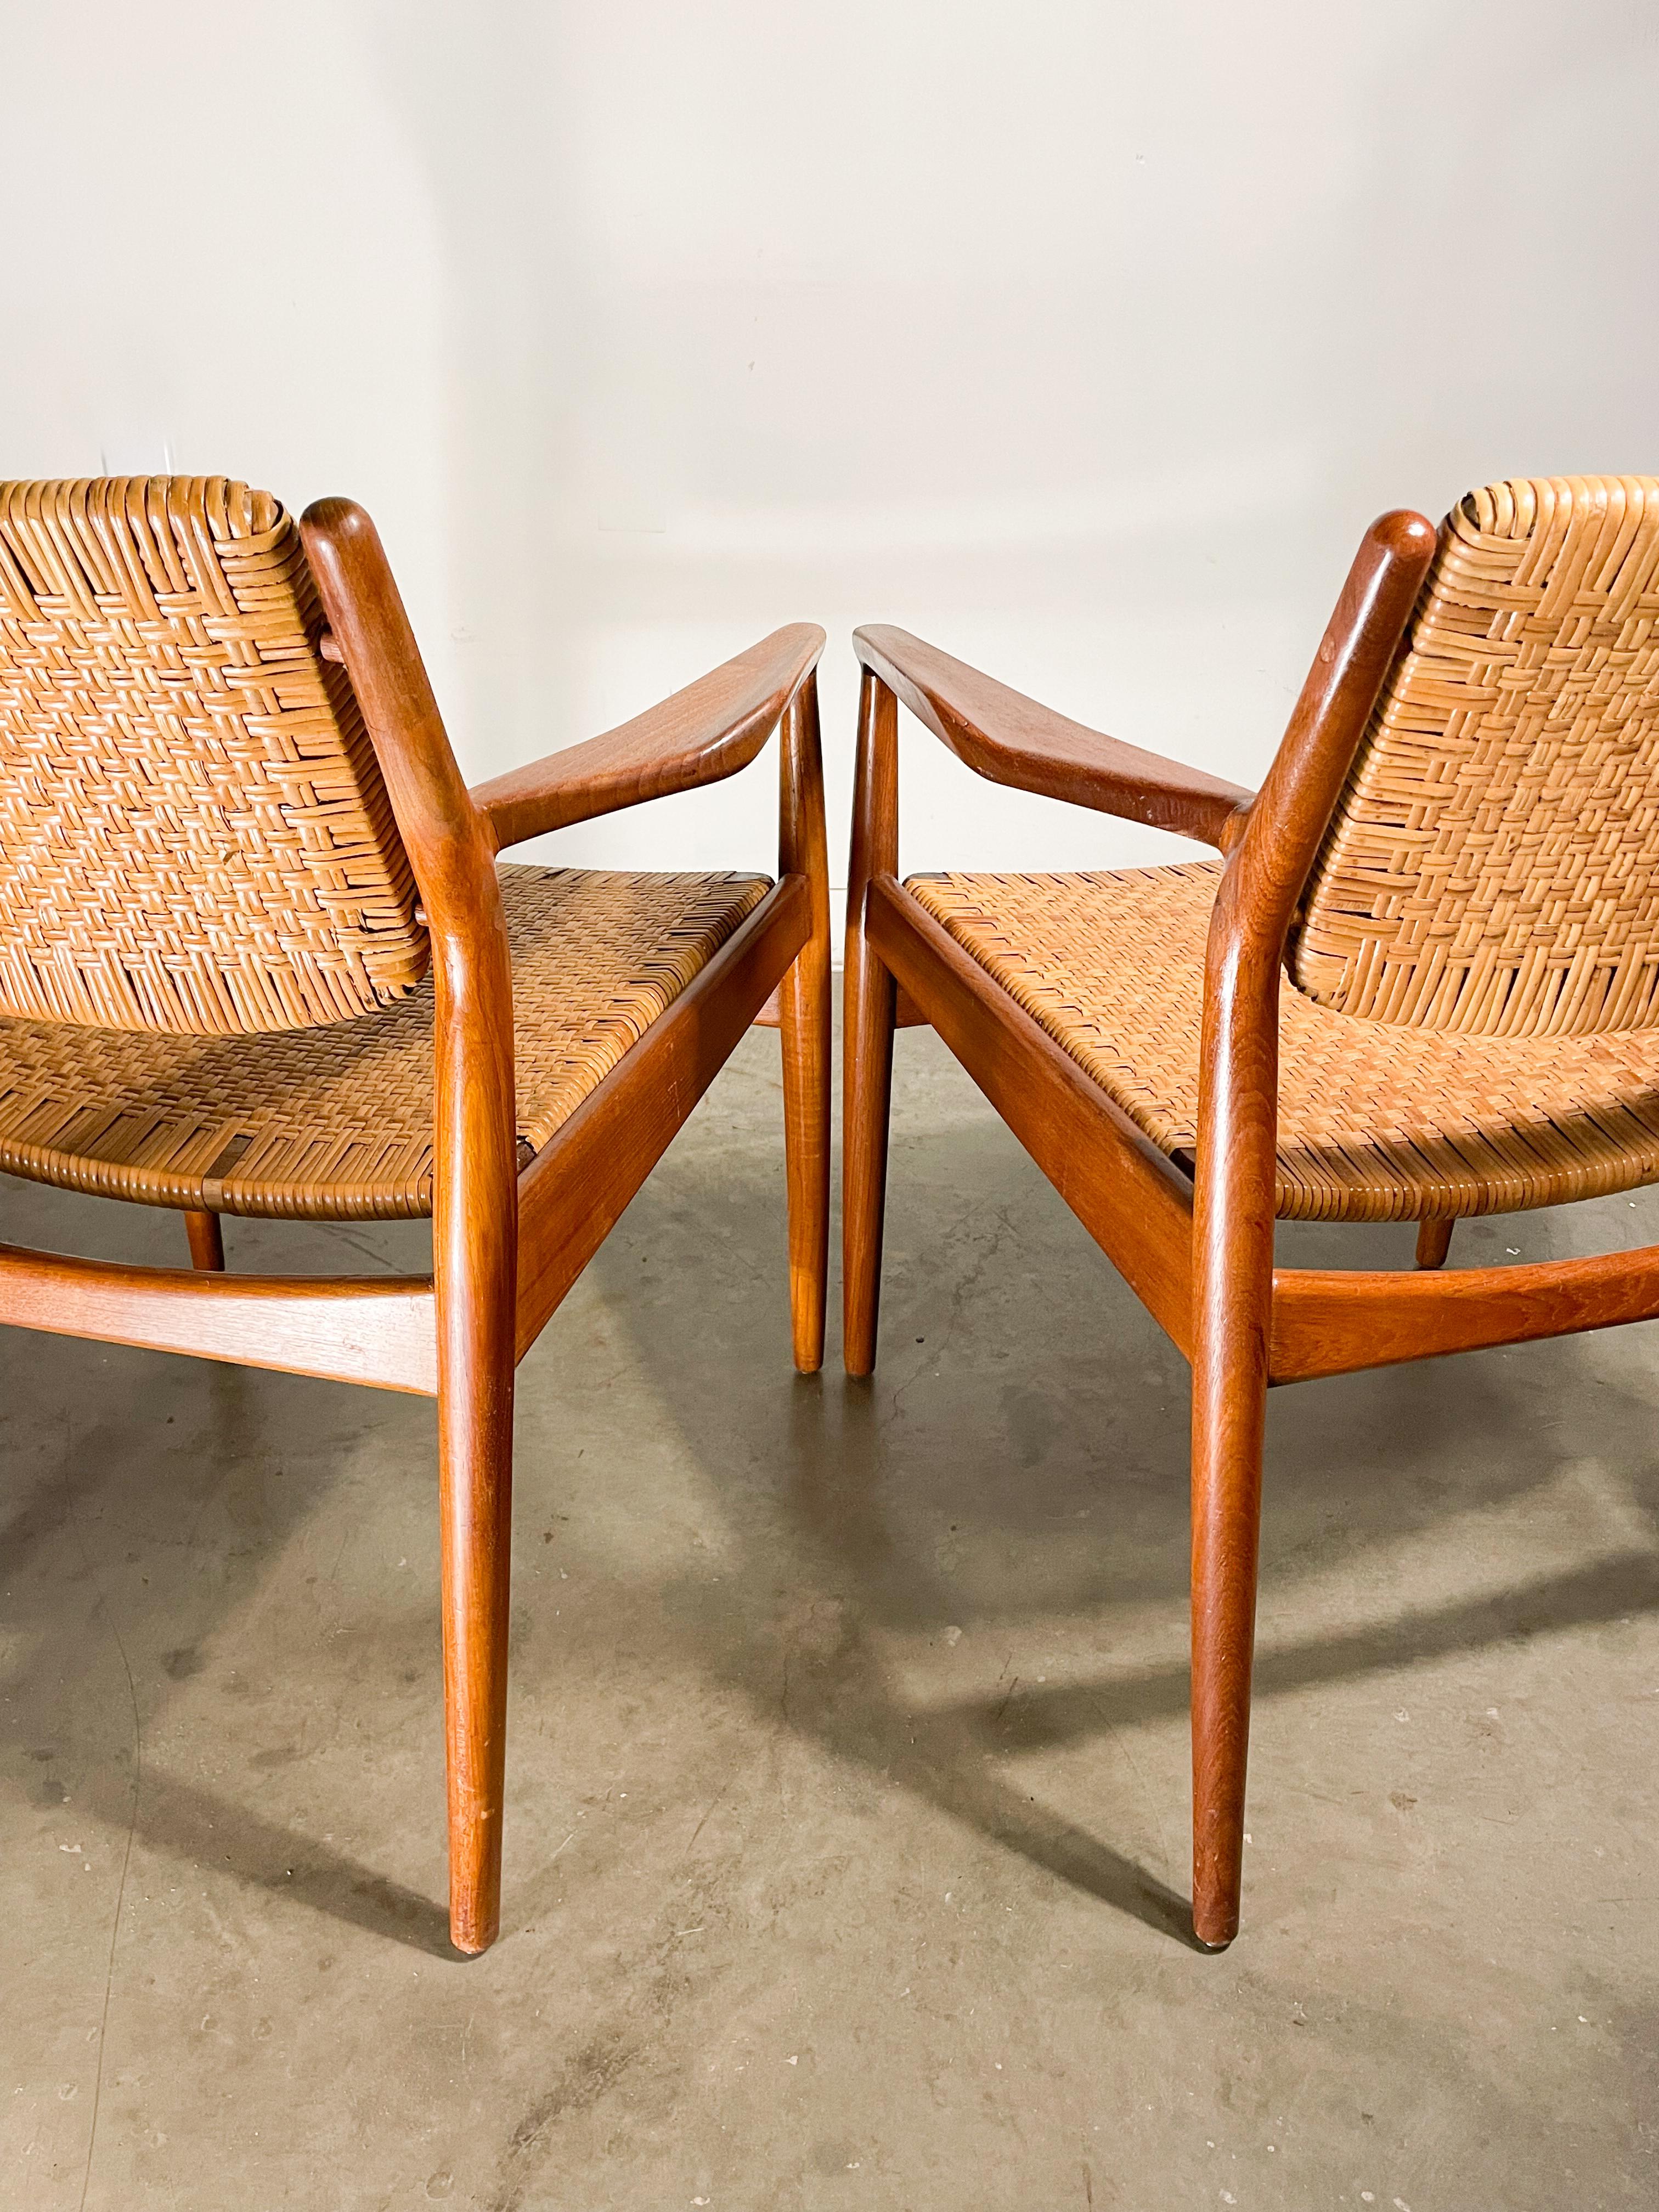 Arne Vodder Danish Modern Teak and Cane Dining chair set In Good Condition For Sale In Kalamazoo, MI